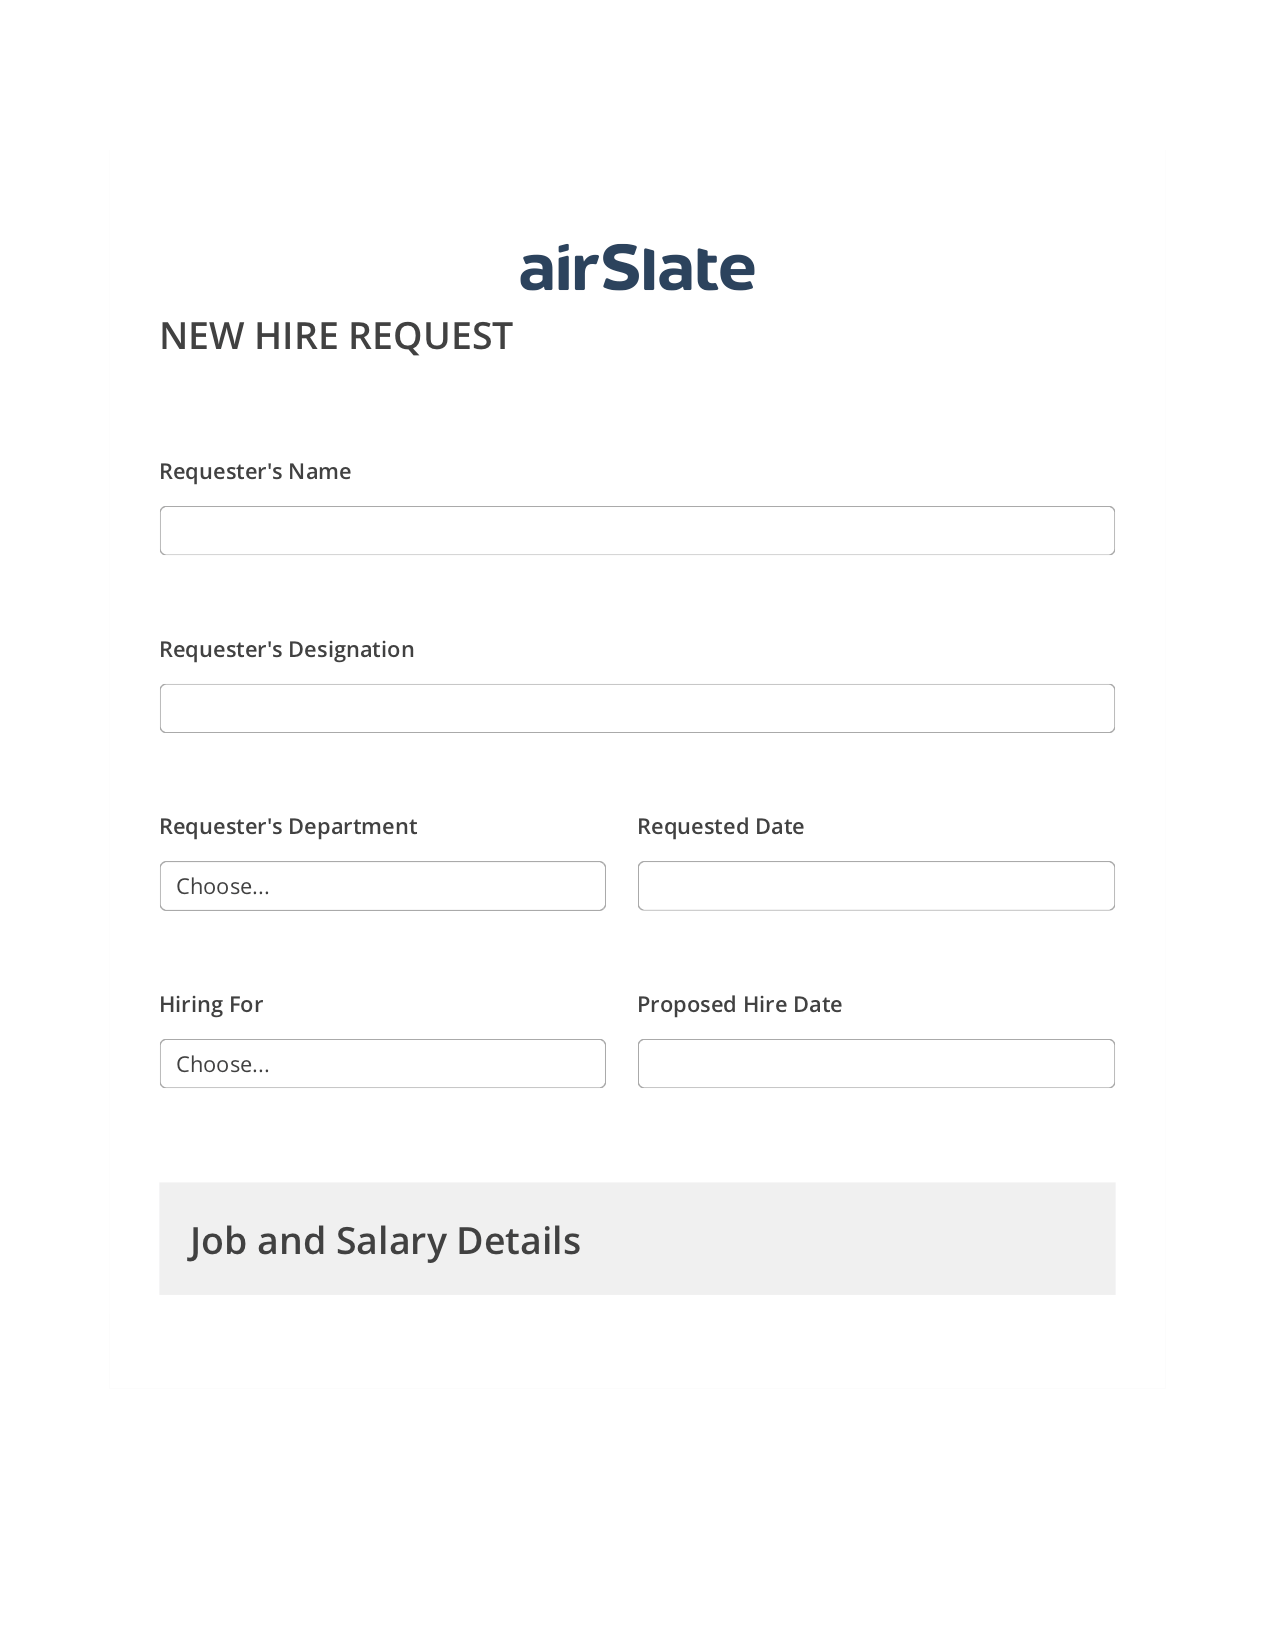 Hiring Request Workflow Pre-fill from another Slate Bot, Update MS Dynamics 365 Record Bot, Email Notification Postfinish Bot